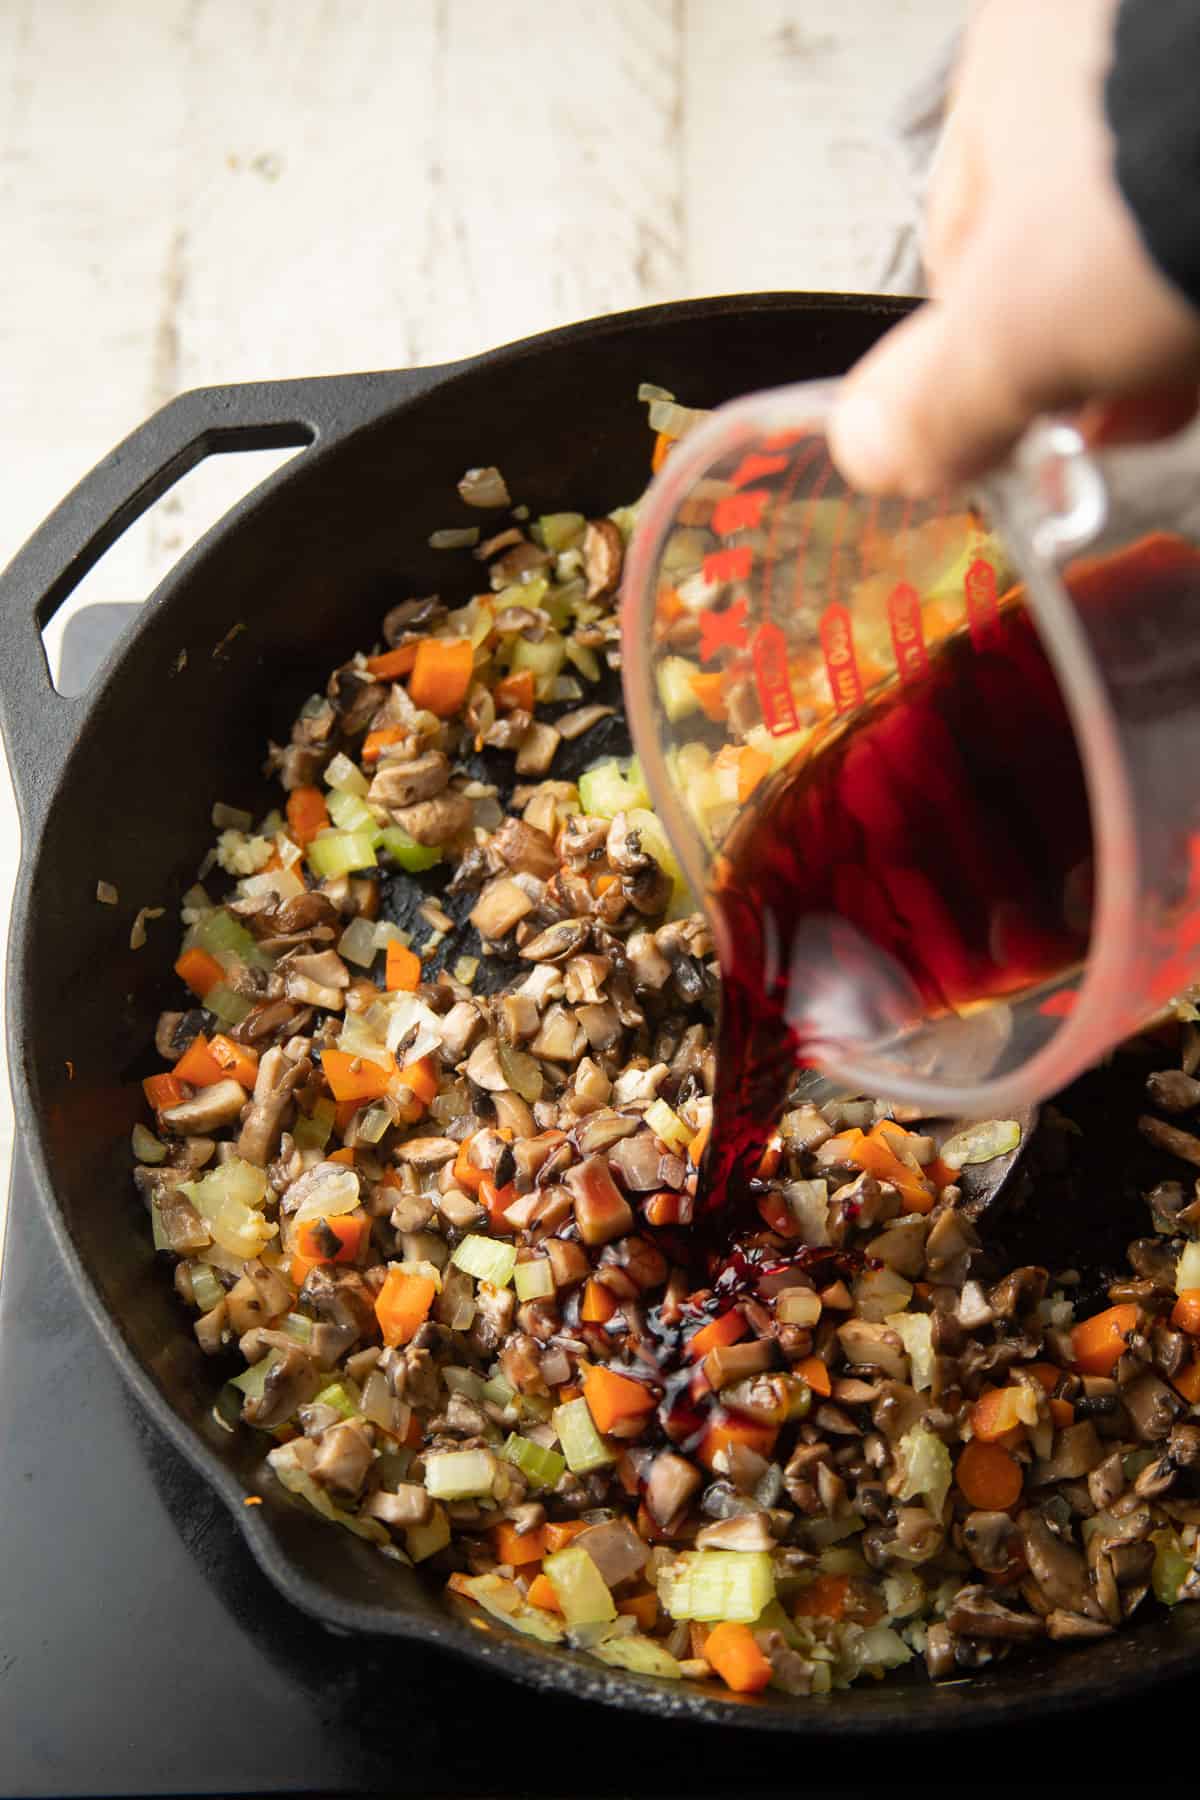 Hand pouring wine into a skillet filled with mushrooms, carrots, onions, and celery.